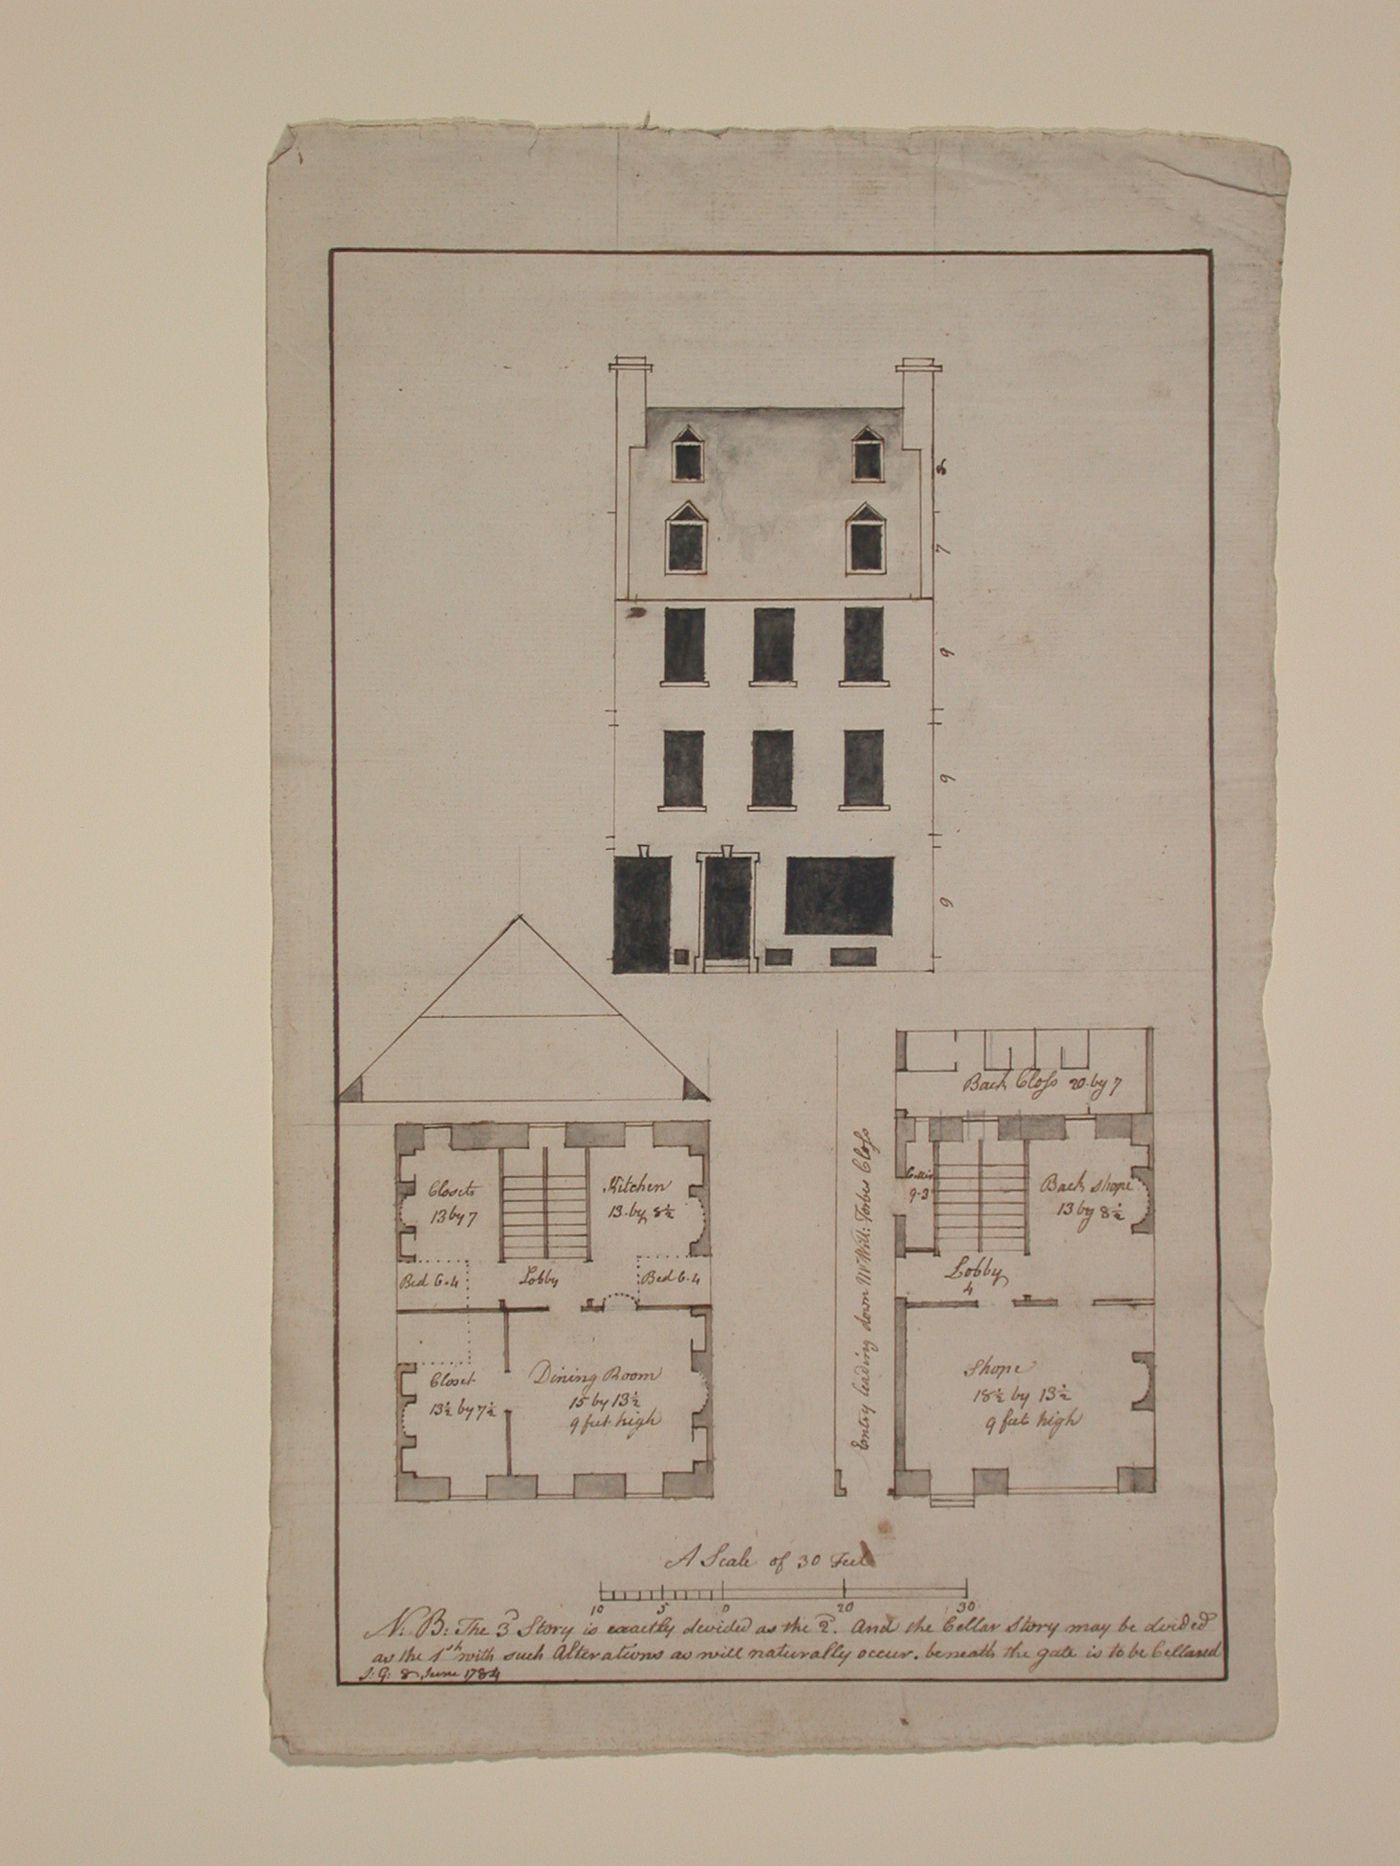 Plans and elevation for a house